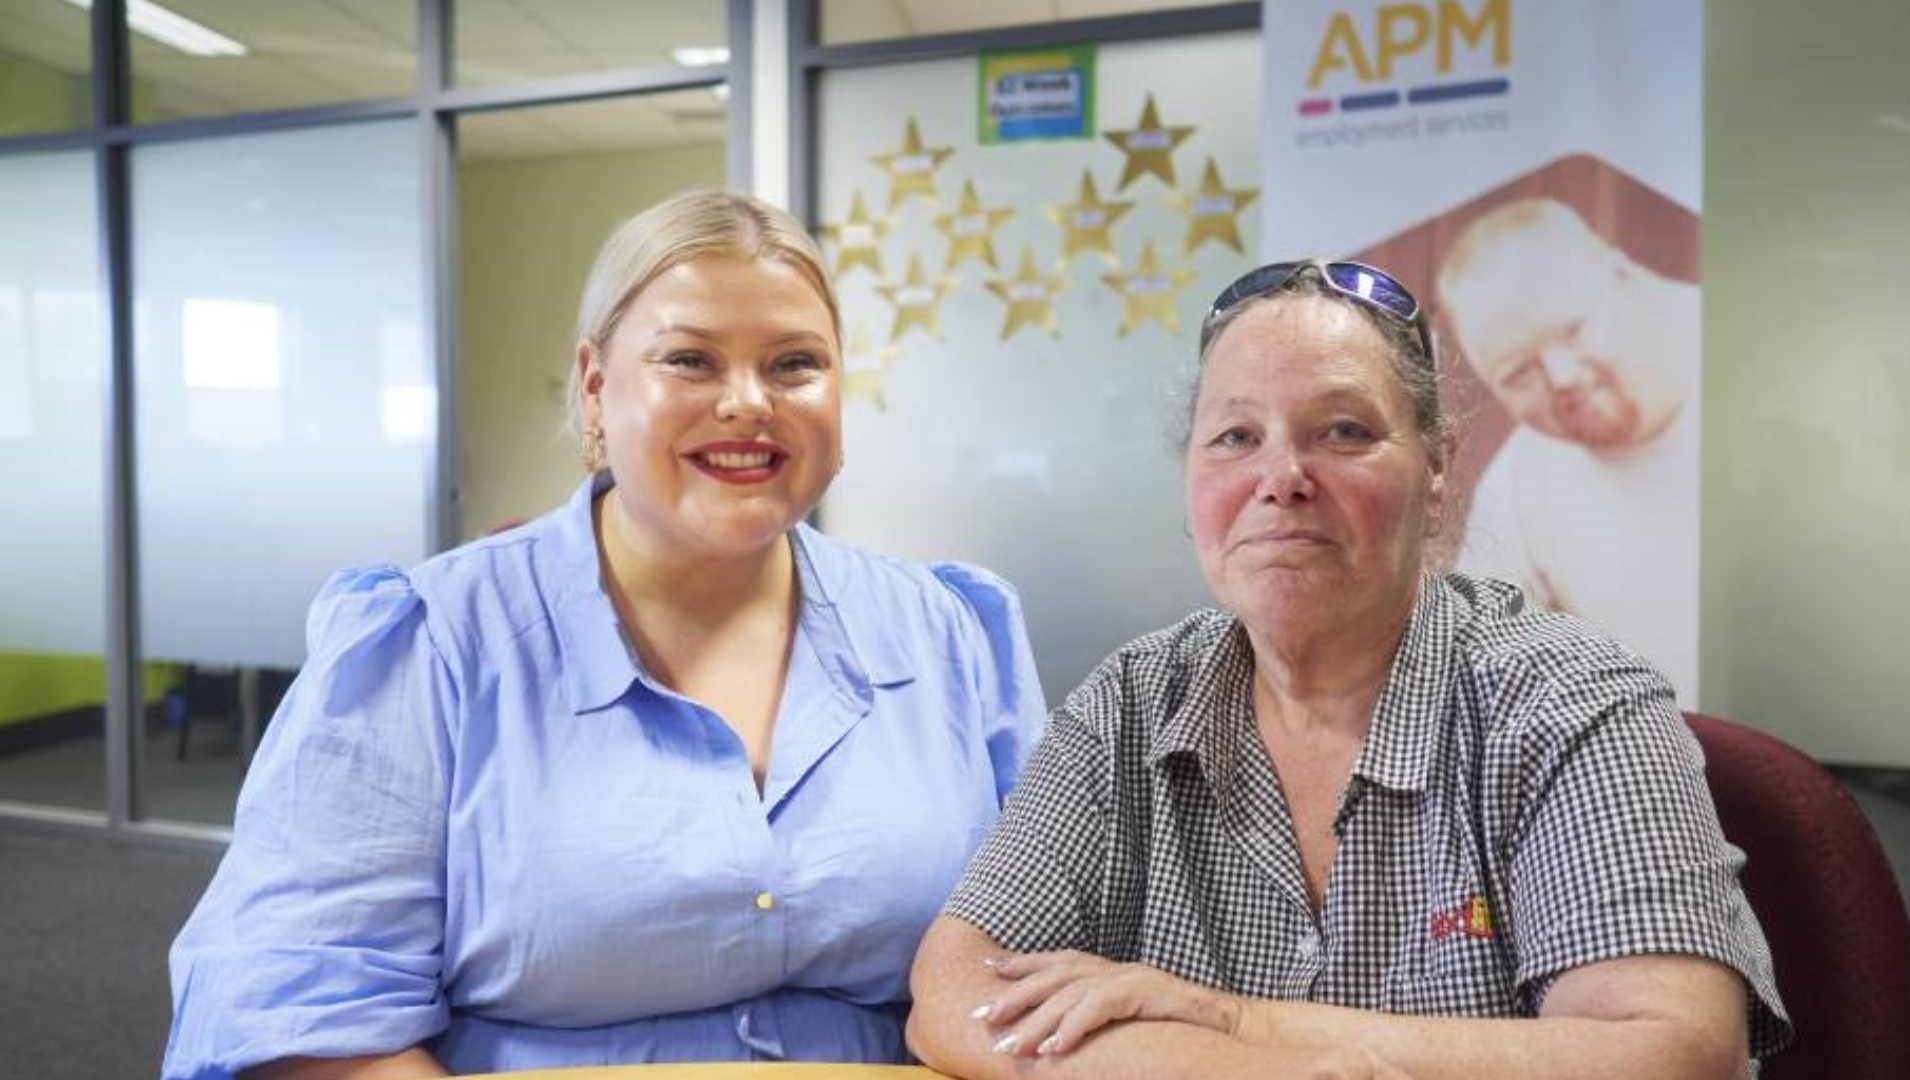 Kellie is sitting on the right hand side of her APM Employment consultant, Paris, they are both seated inside an APM office